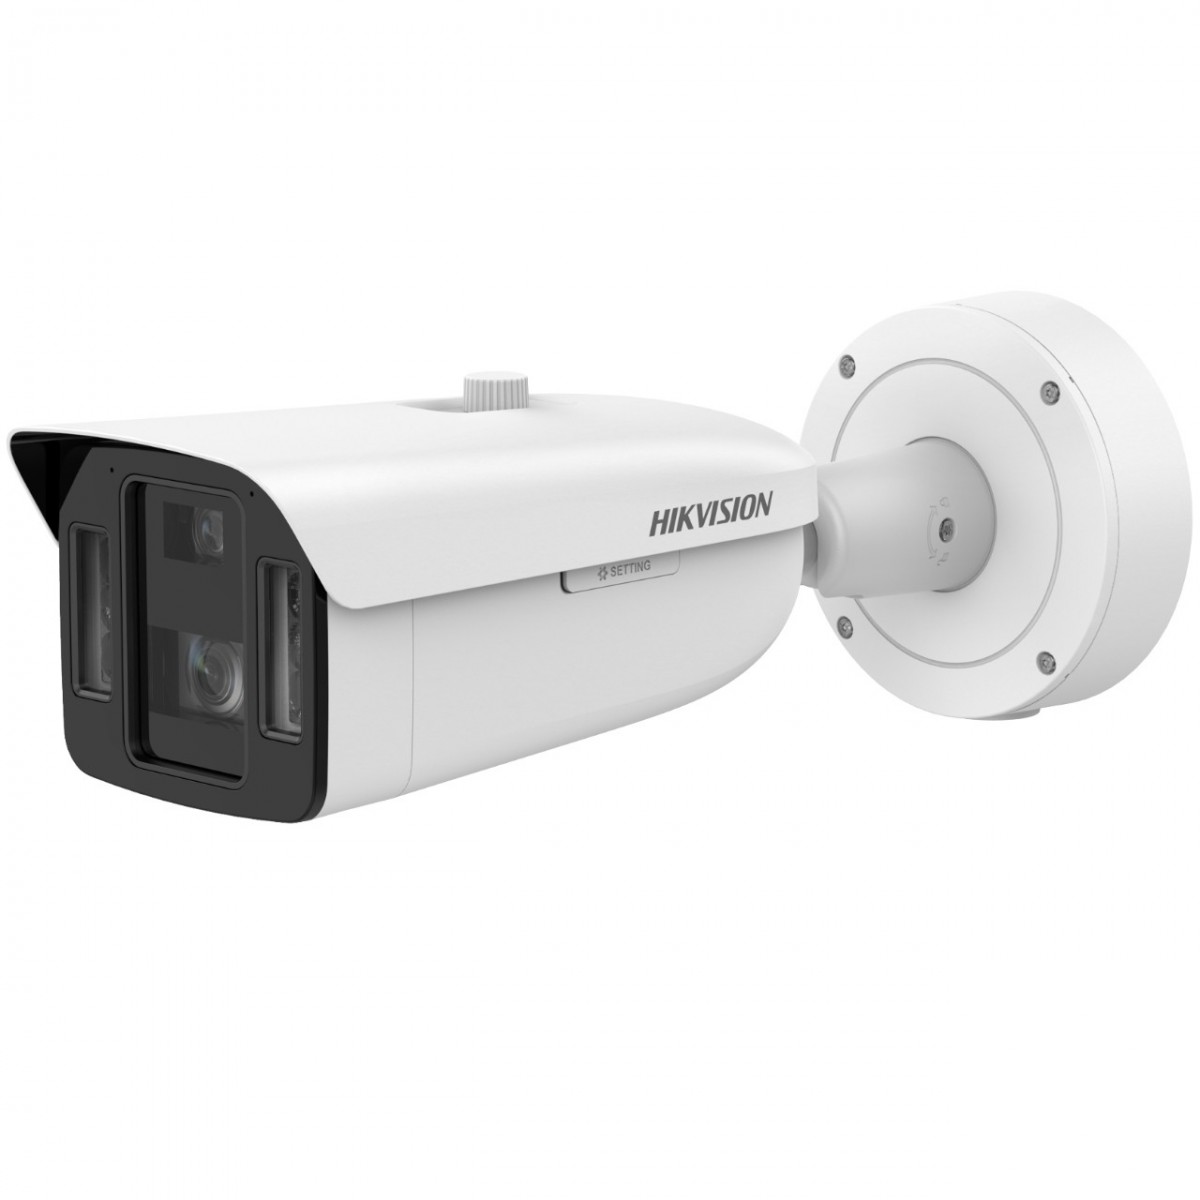 Hikvision iDS-2CD8A46G0-XZHSY 0832-4 Bullet 4MP DeepinView